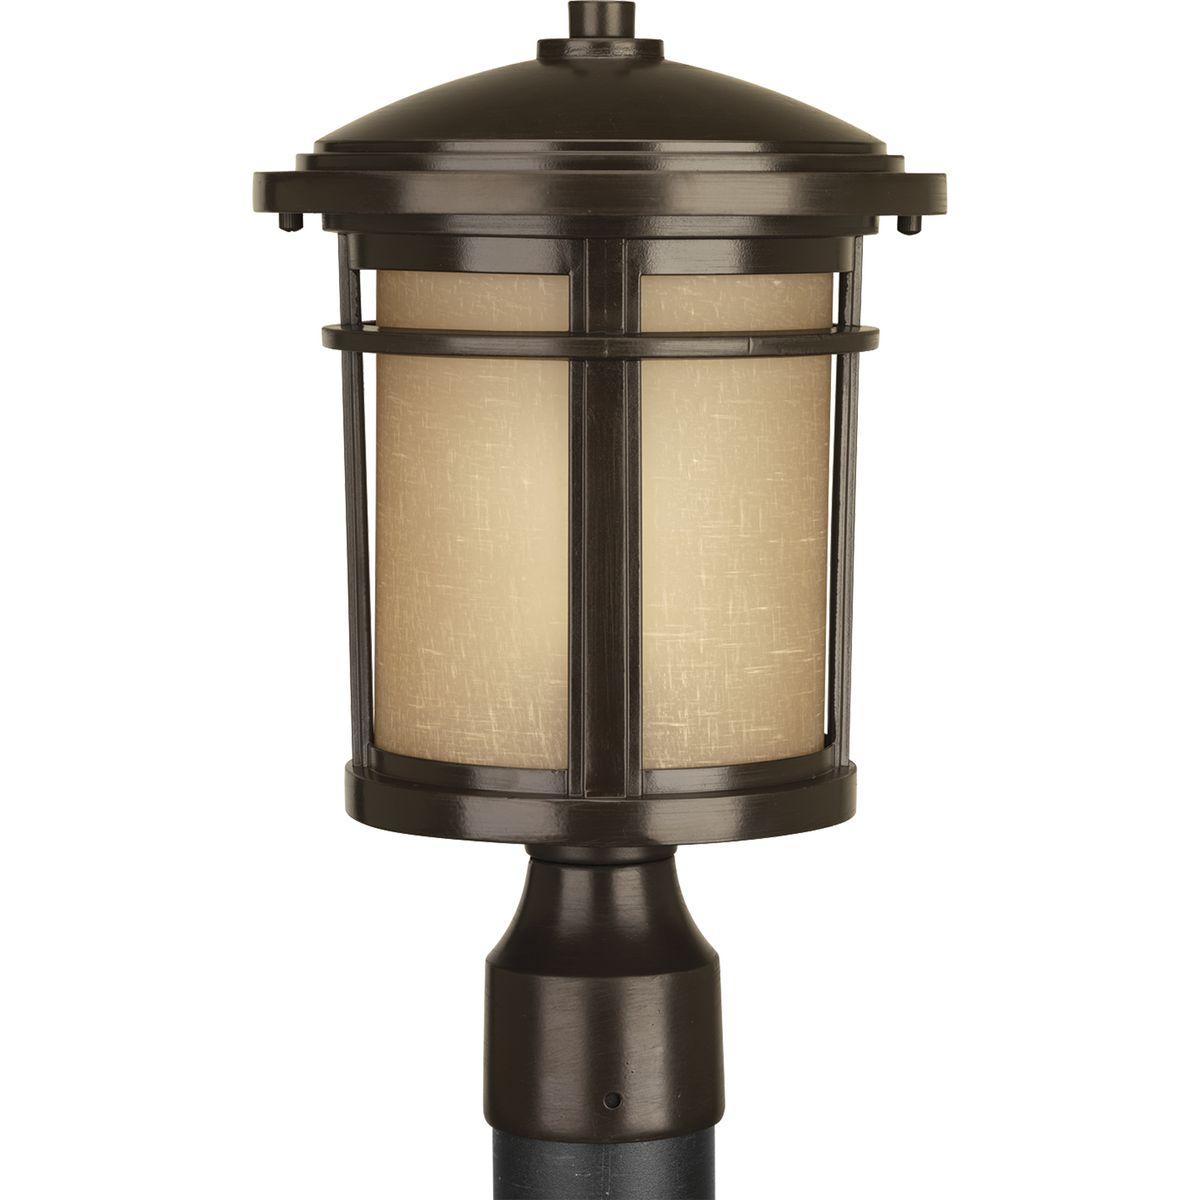 Hubbell P6424-20 Illuminate your home with this remarkable bronze finished post. Post lantern with etched umber linen glass.  ; Etched umber linen glass. ; Cast aluminum construction. ; Powder coated finish.